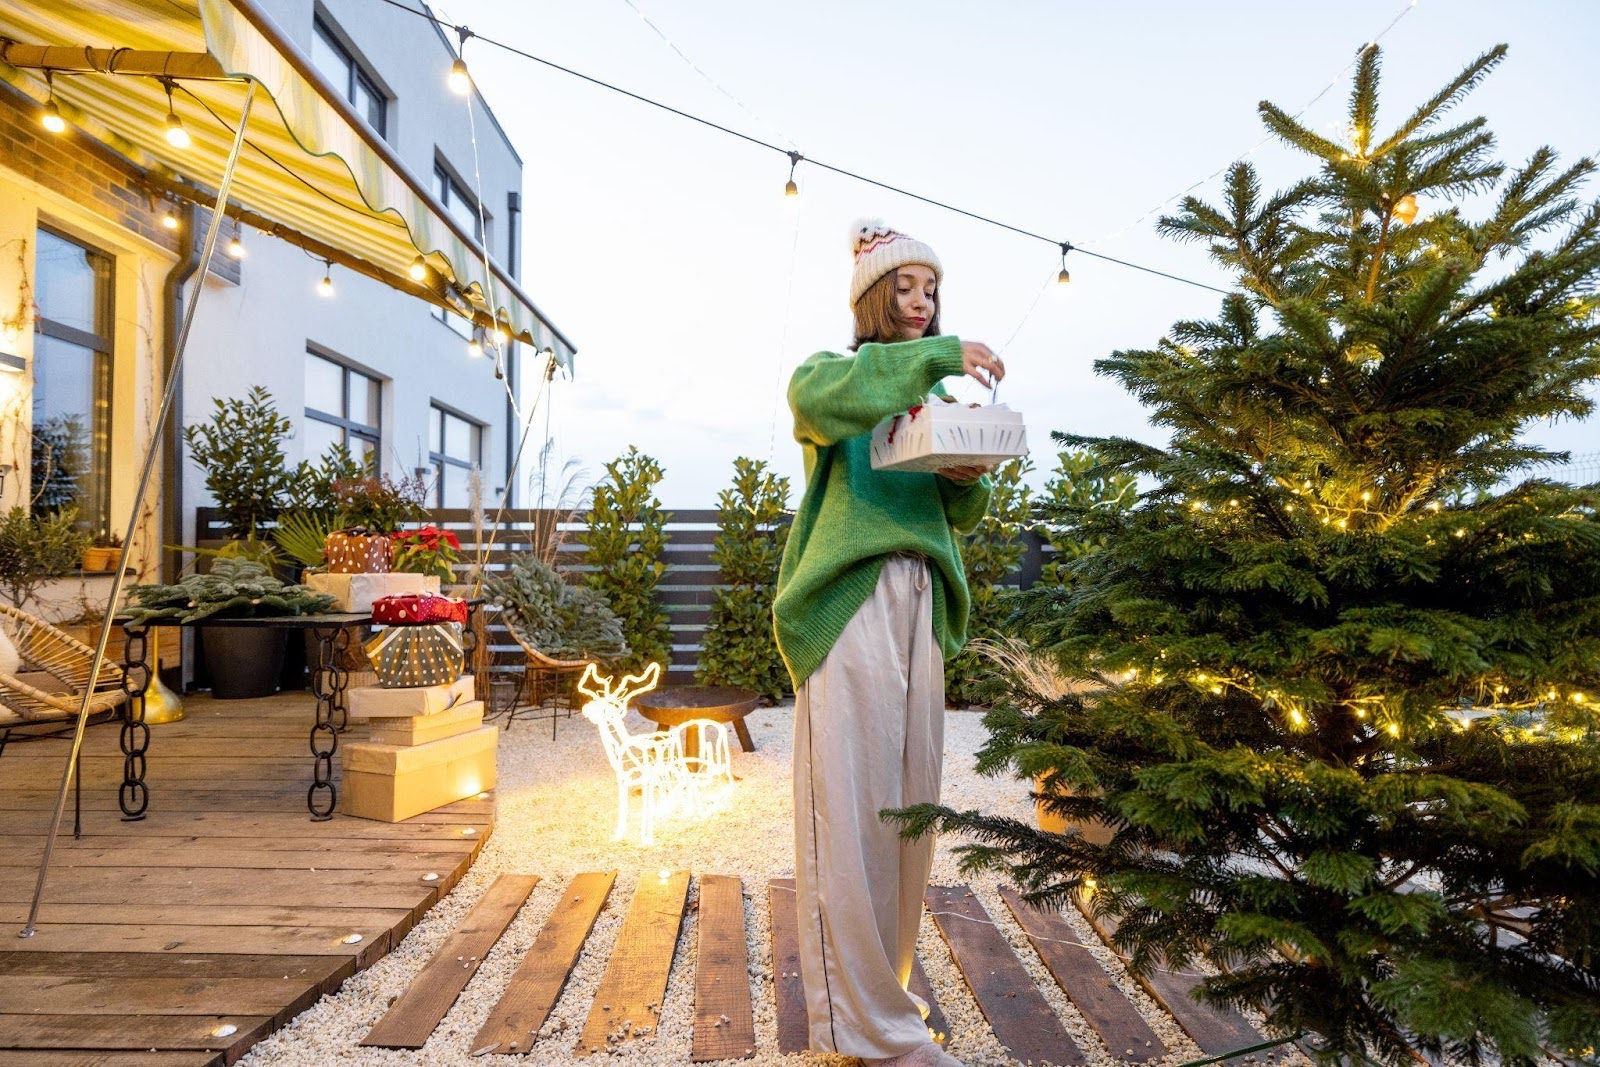 Holiday Decorations for Patios and Decks